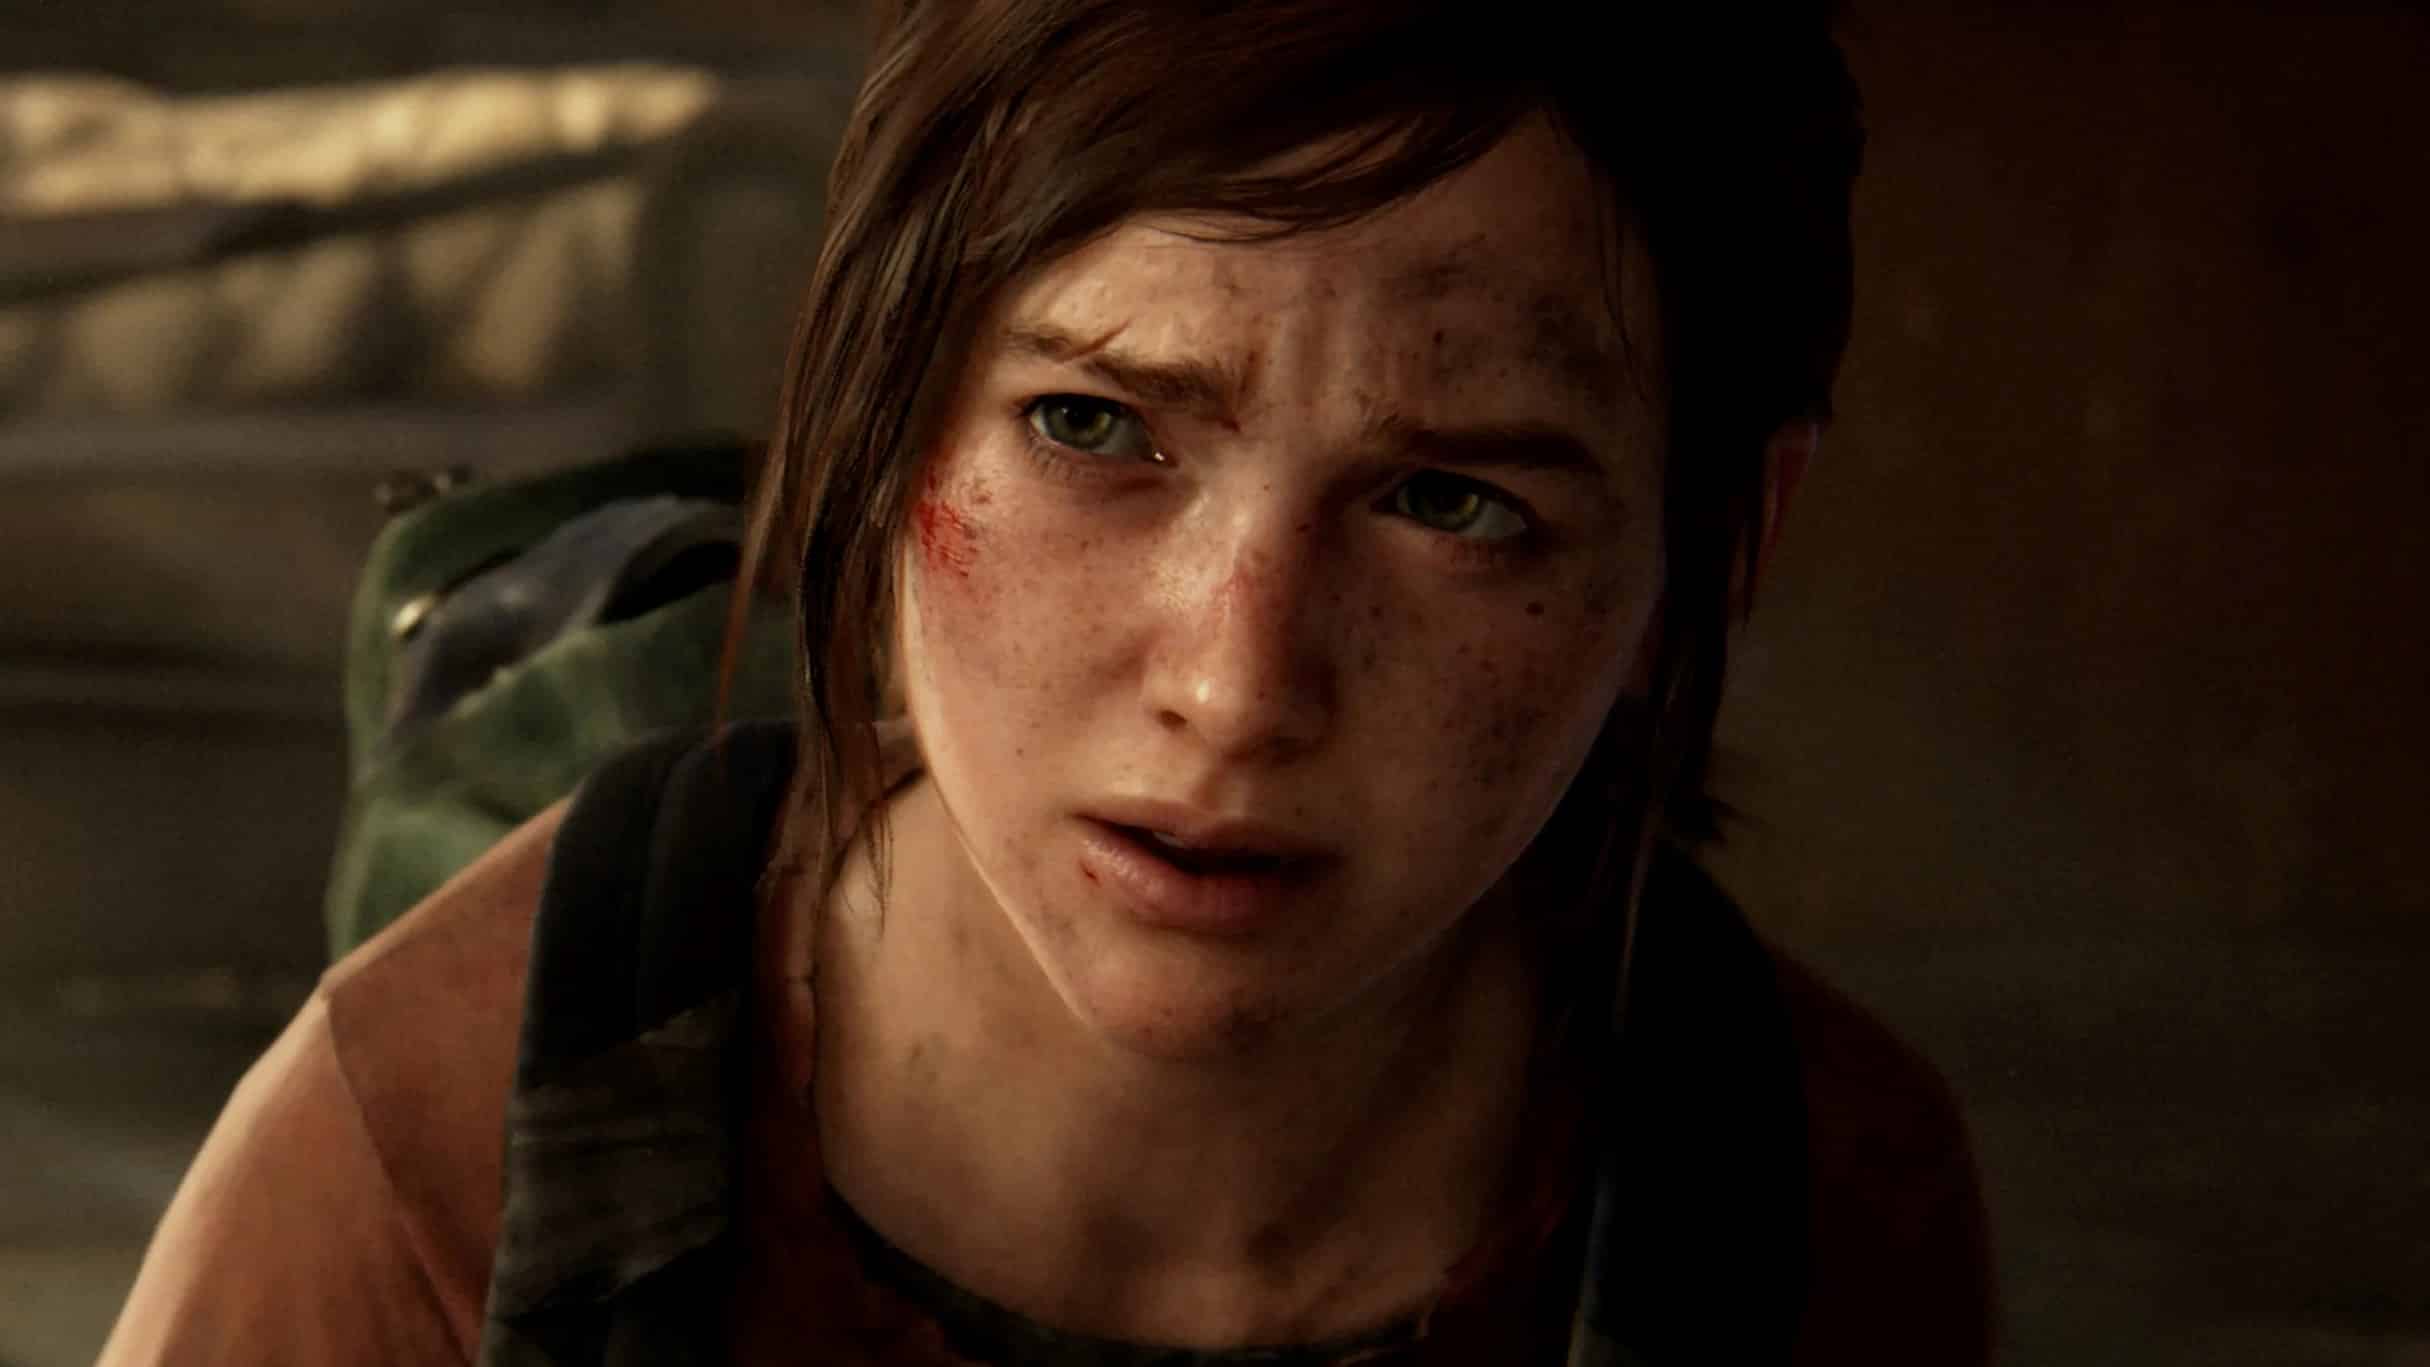 The Last of Us Part 1 remake: Release date, platforms, PS5